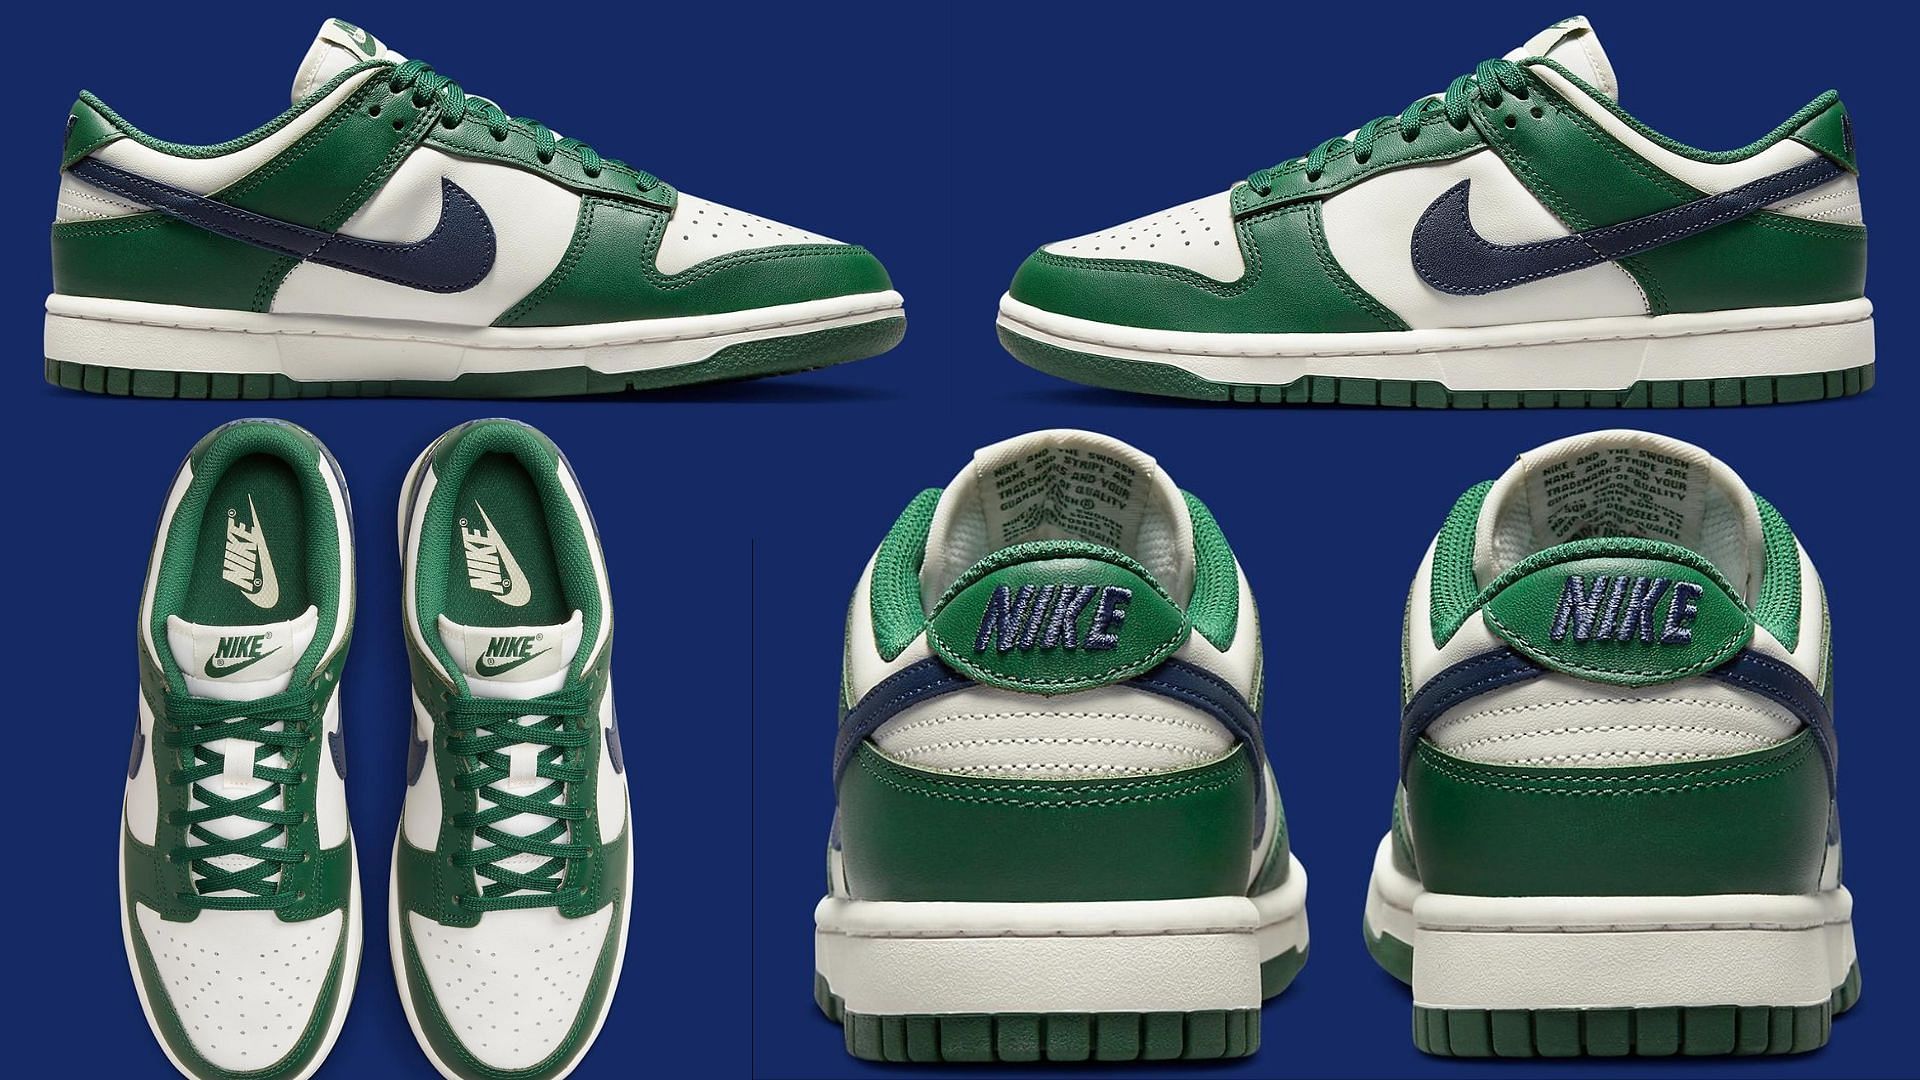 The upcoming Nike Dunk Low &quot;Gorge Green&quot; sneakers feature midnight navy swooshes and a white base (Image via Nike)